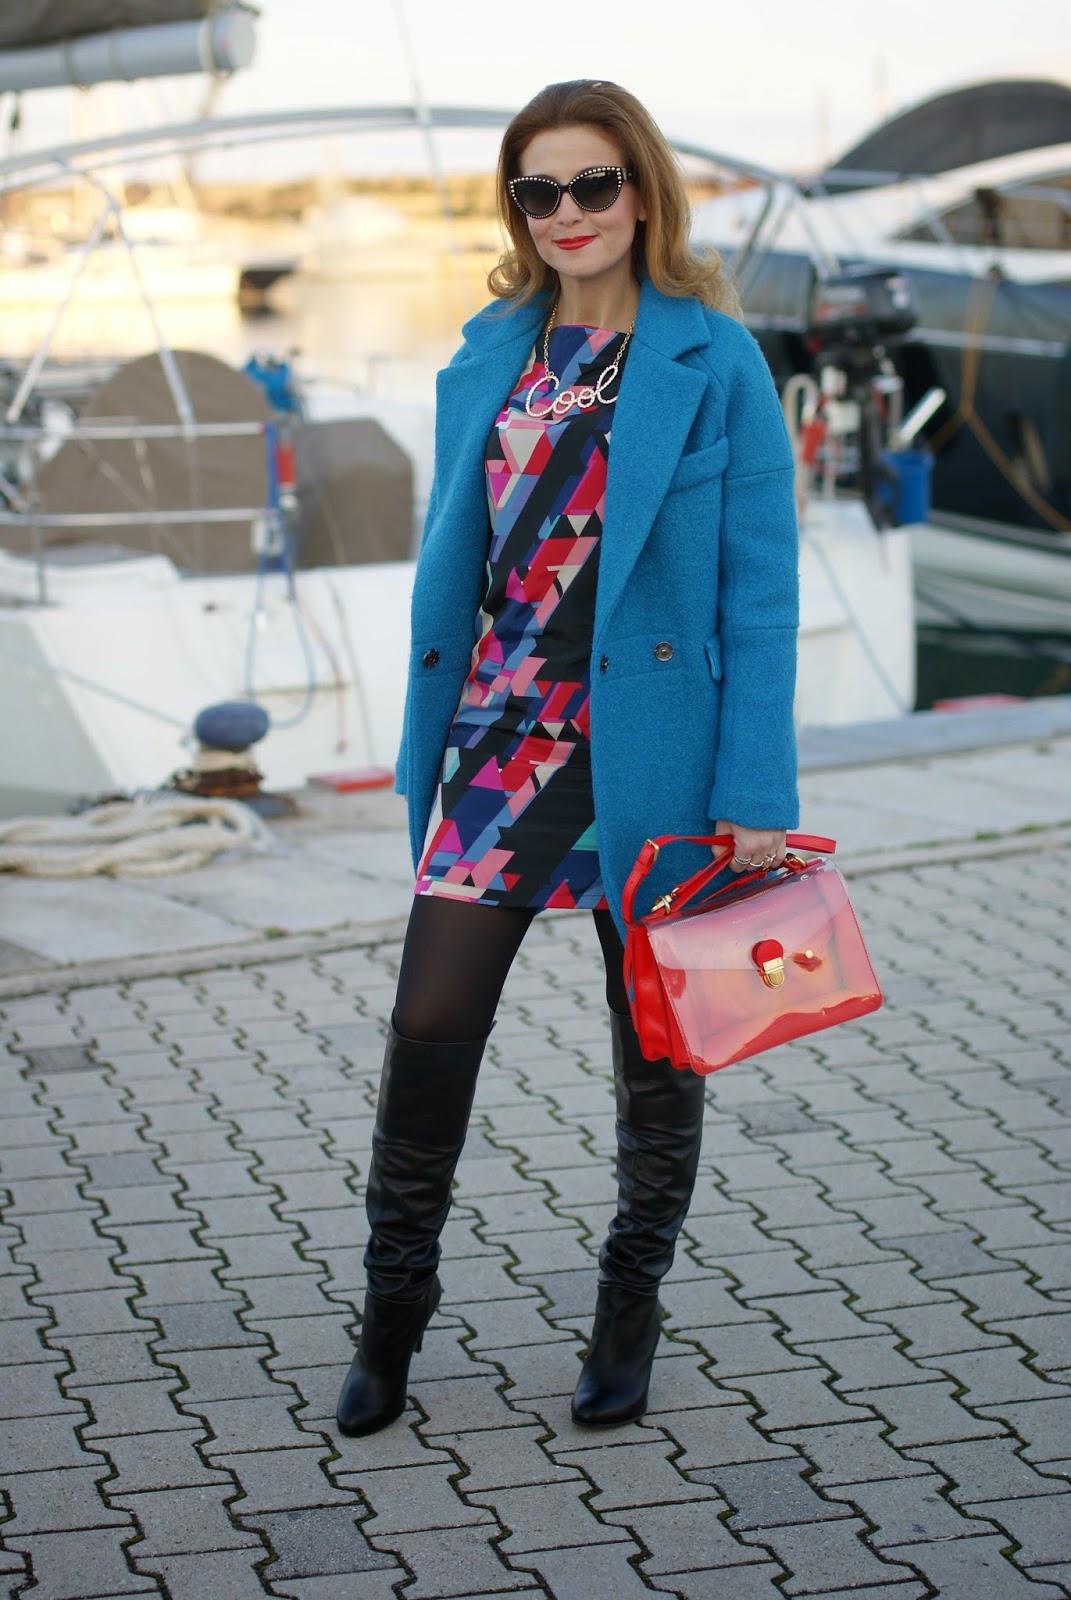 Paramita geometric print dress with over the knee boots, Marc by Marc Jacobs bag on Fashion and Cookies fashion blog